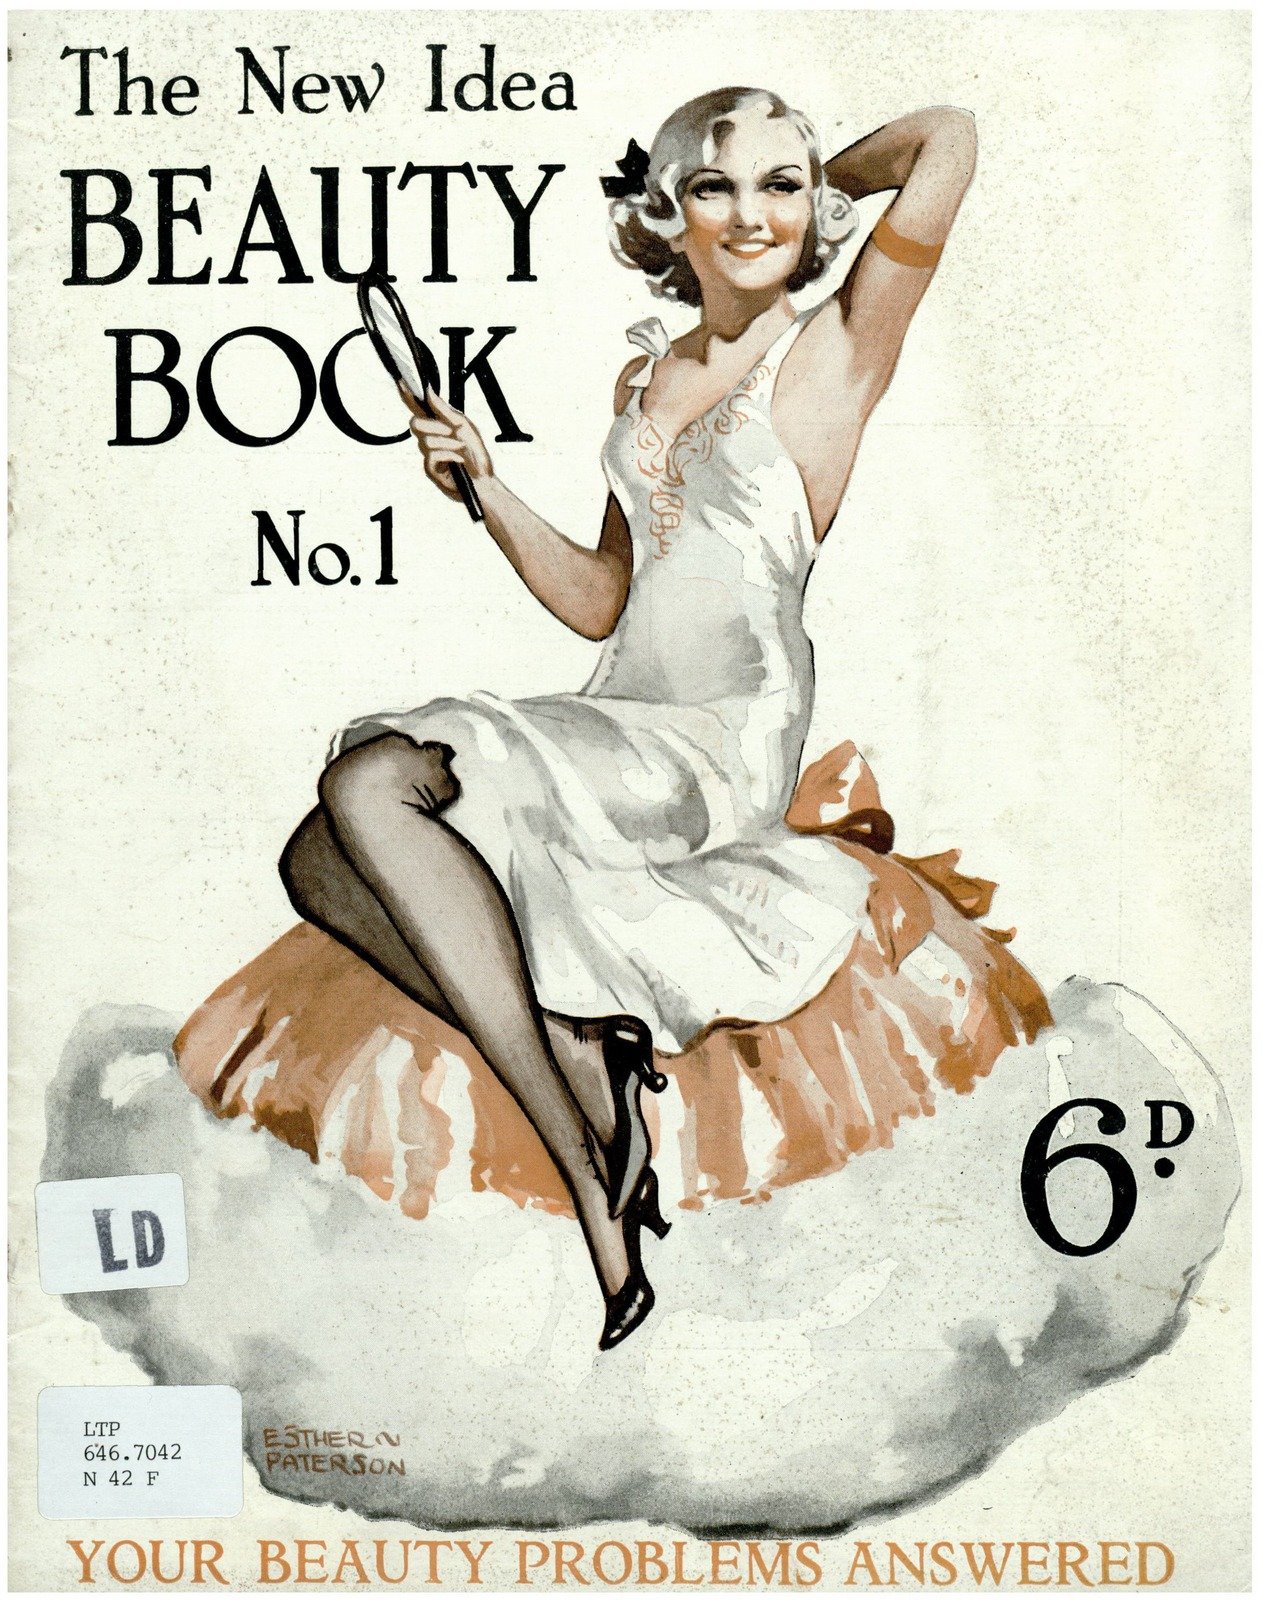 Cover of New Idea featuring woman in white dress and title 'New Idea Beauty book. No. 1'